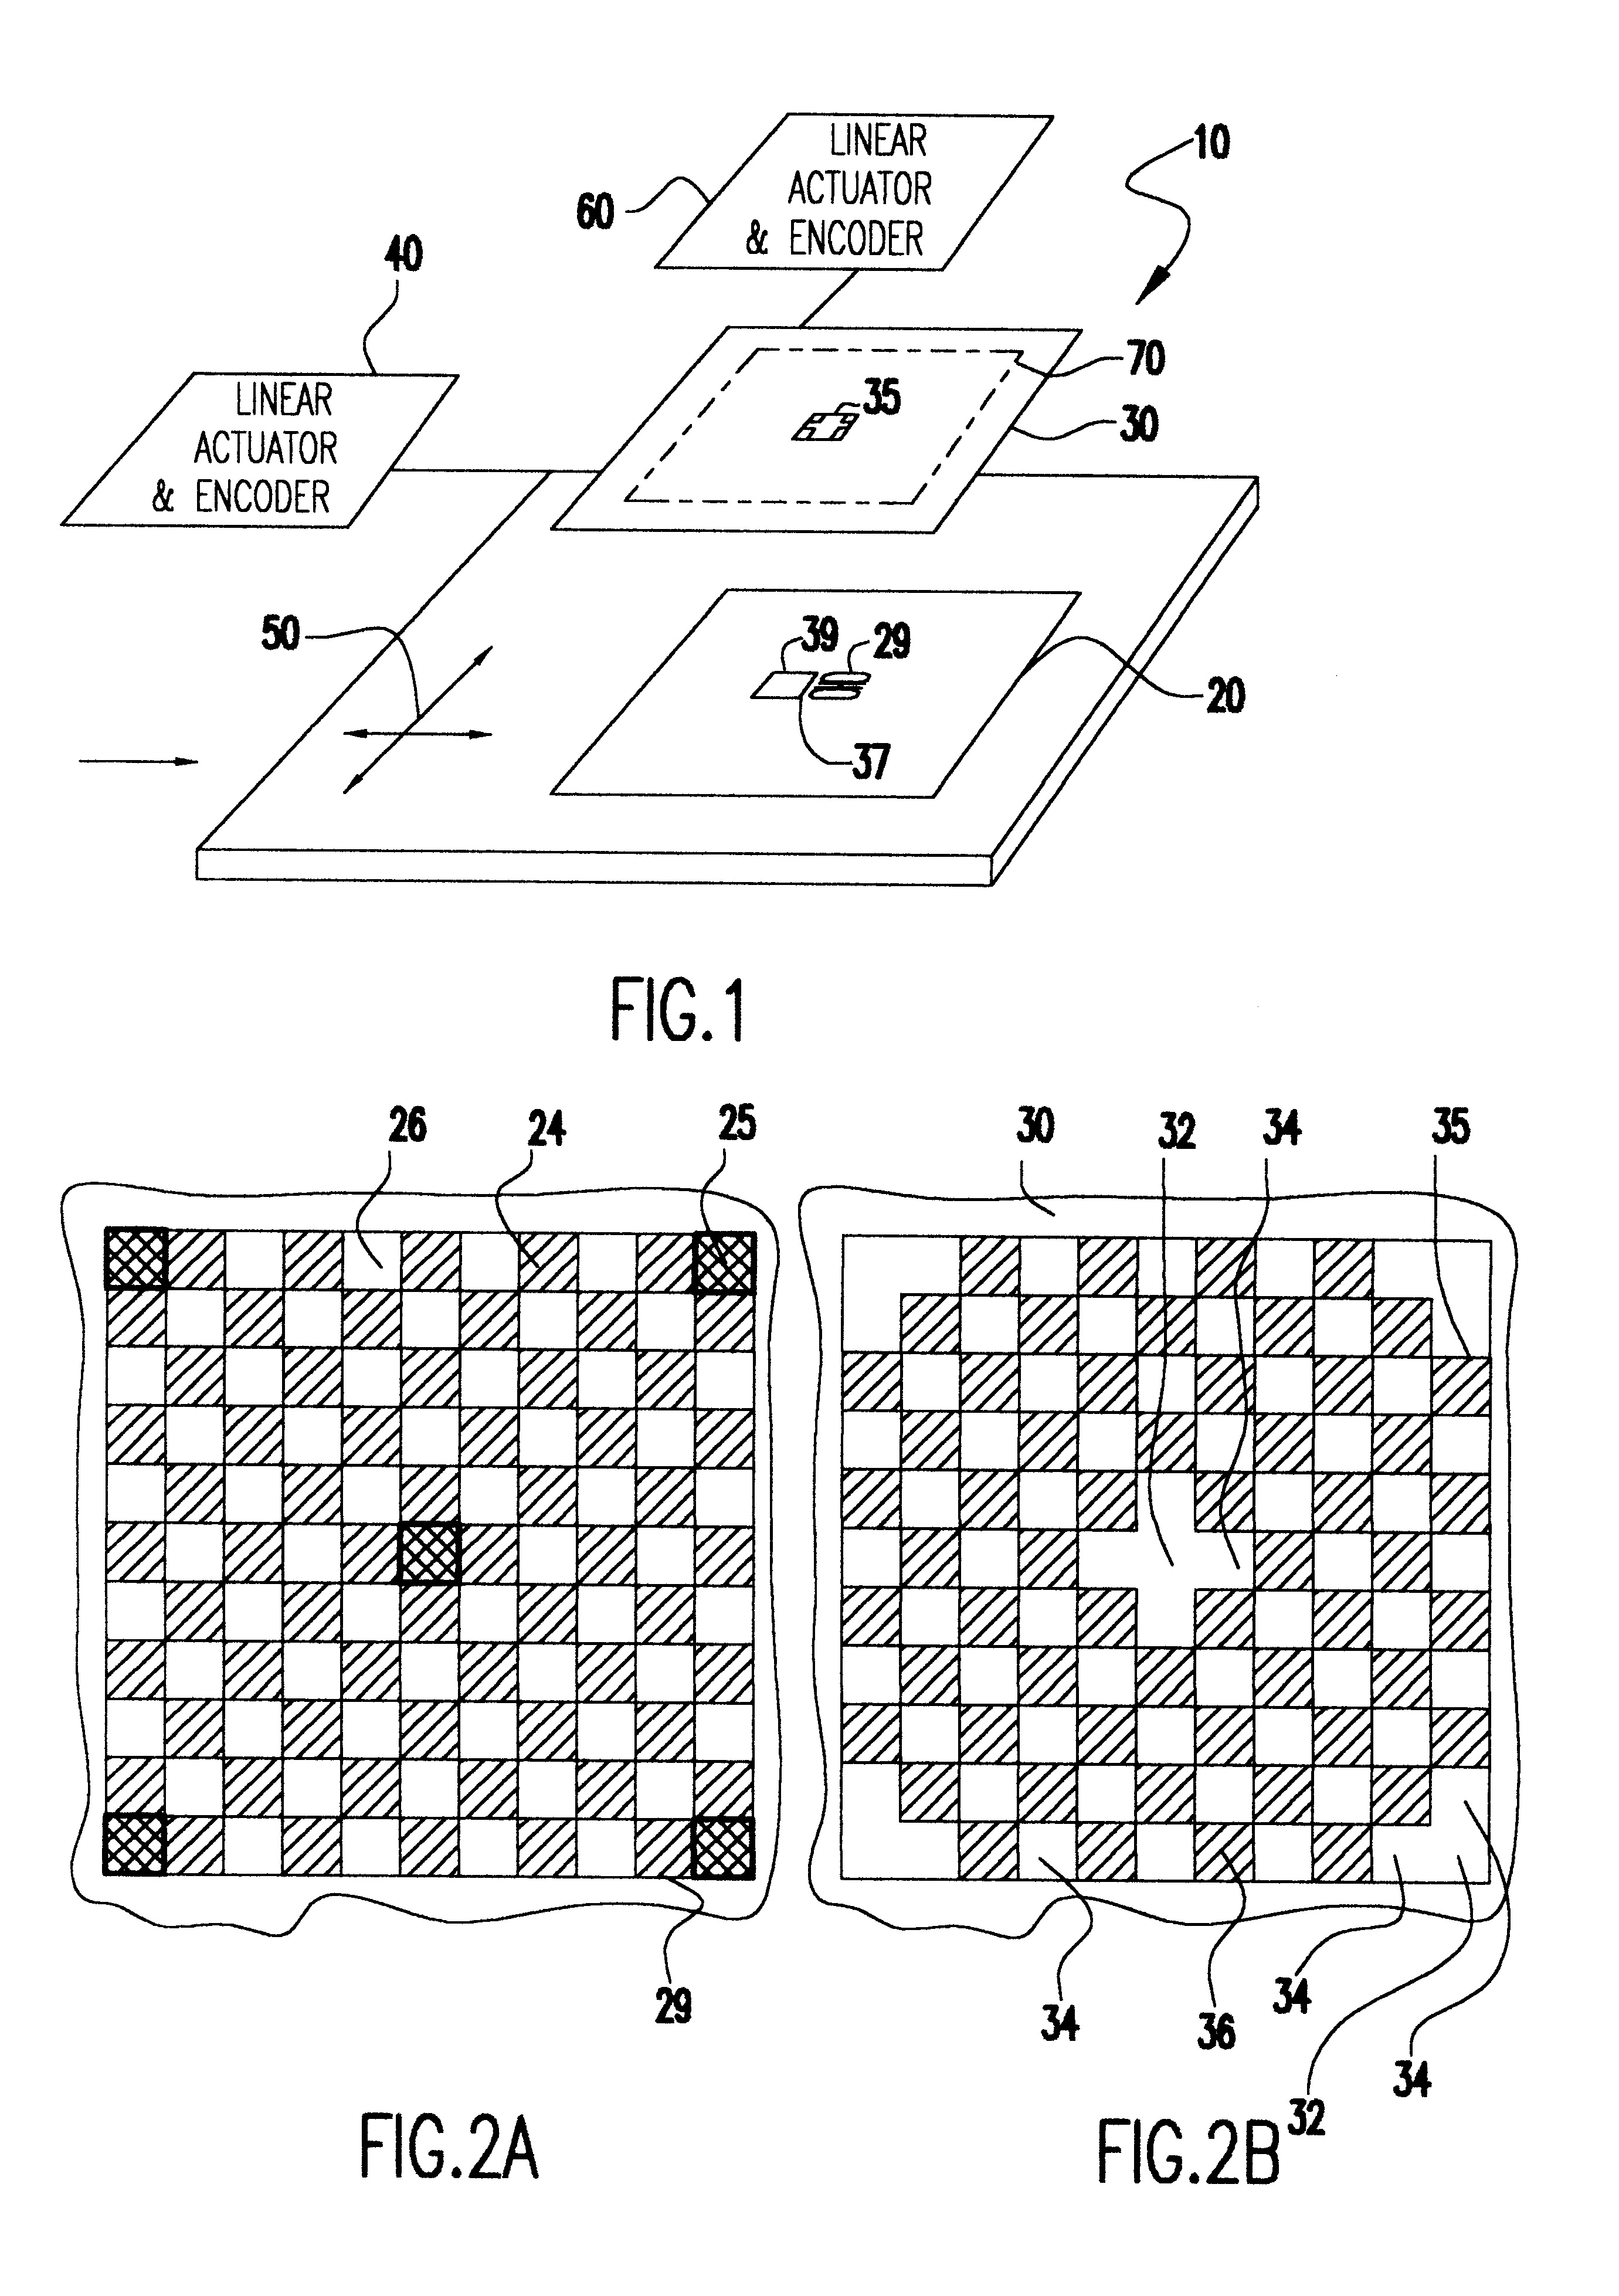 Variable transmission reticle for charged particle beam lithography tool